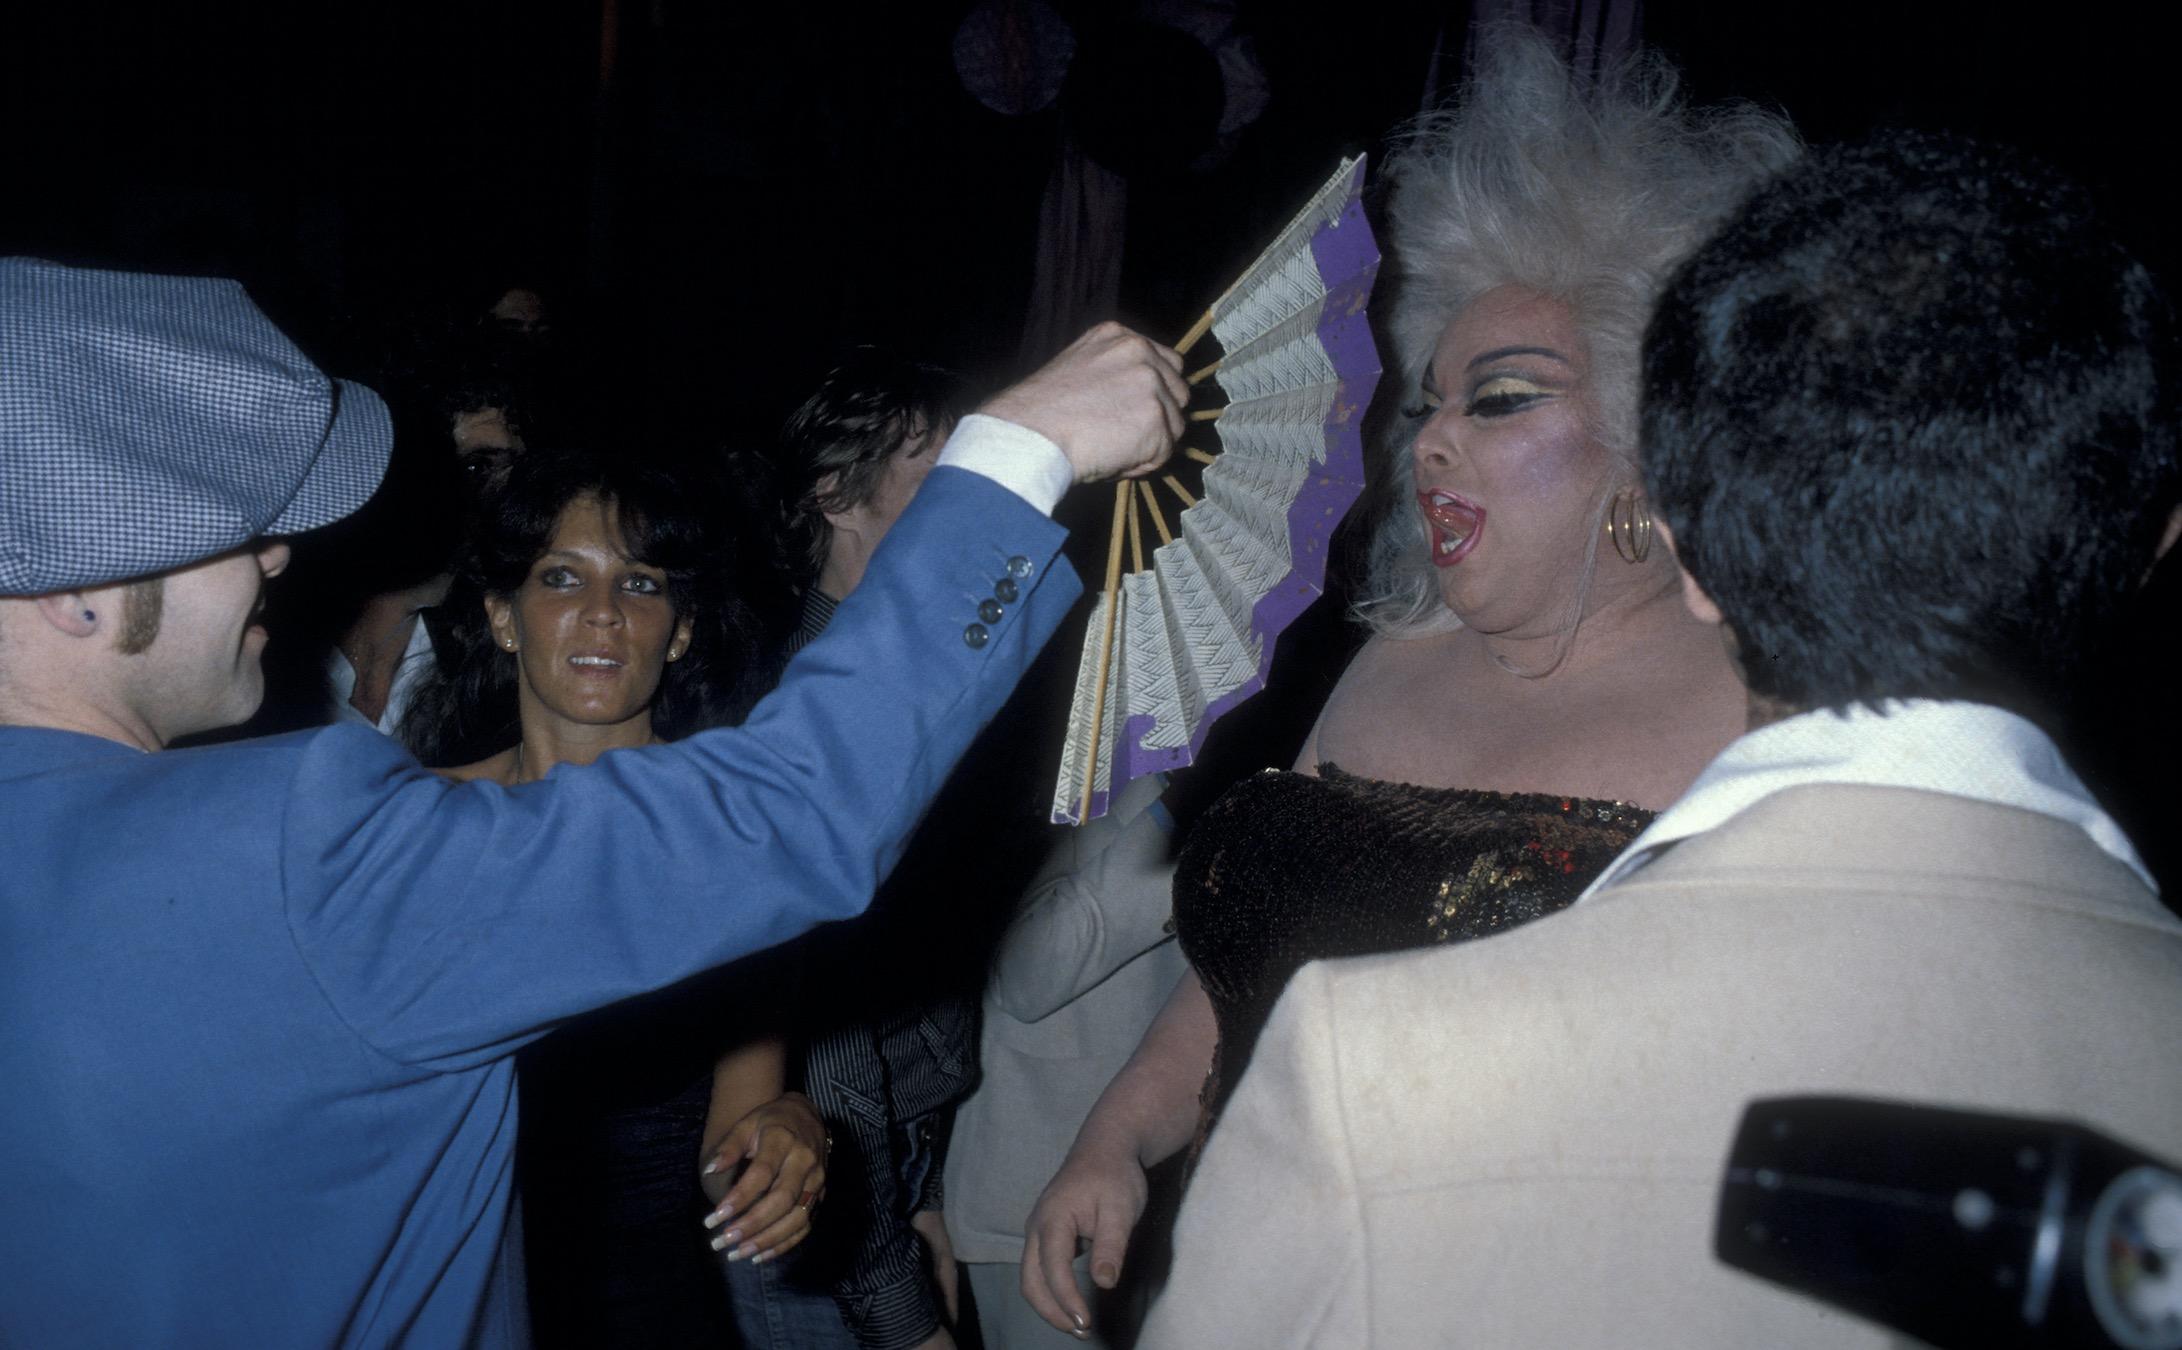 The Opening Night of Studio 54 Was Exactly The Hedonistic Riot You'd Expect